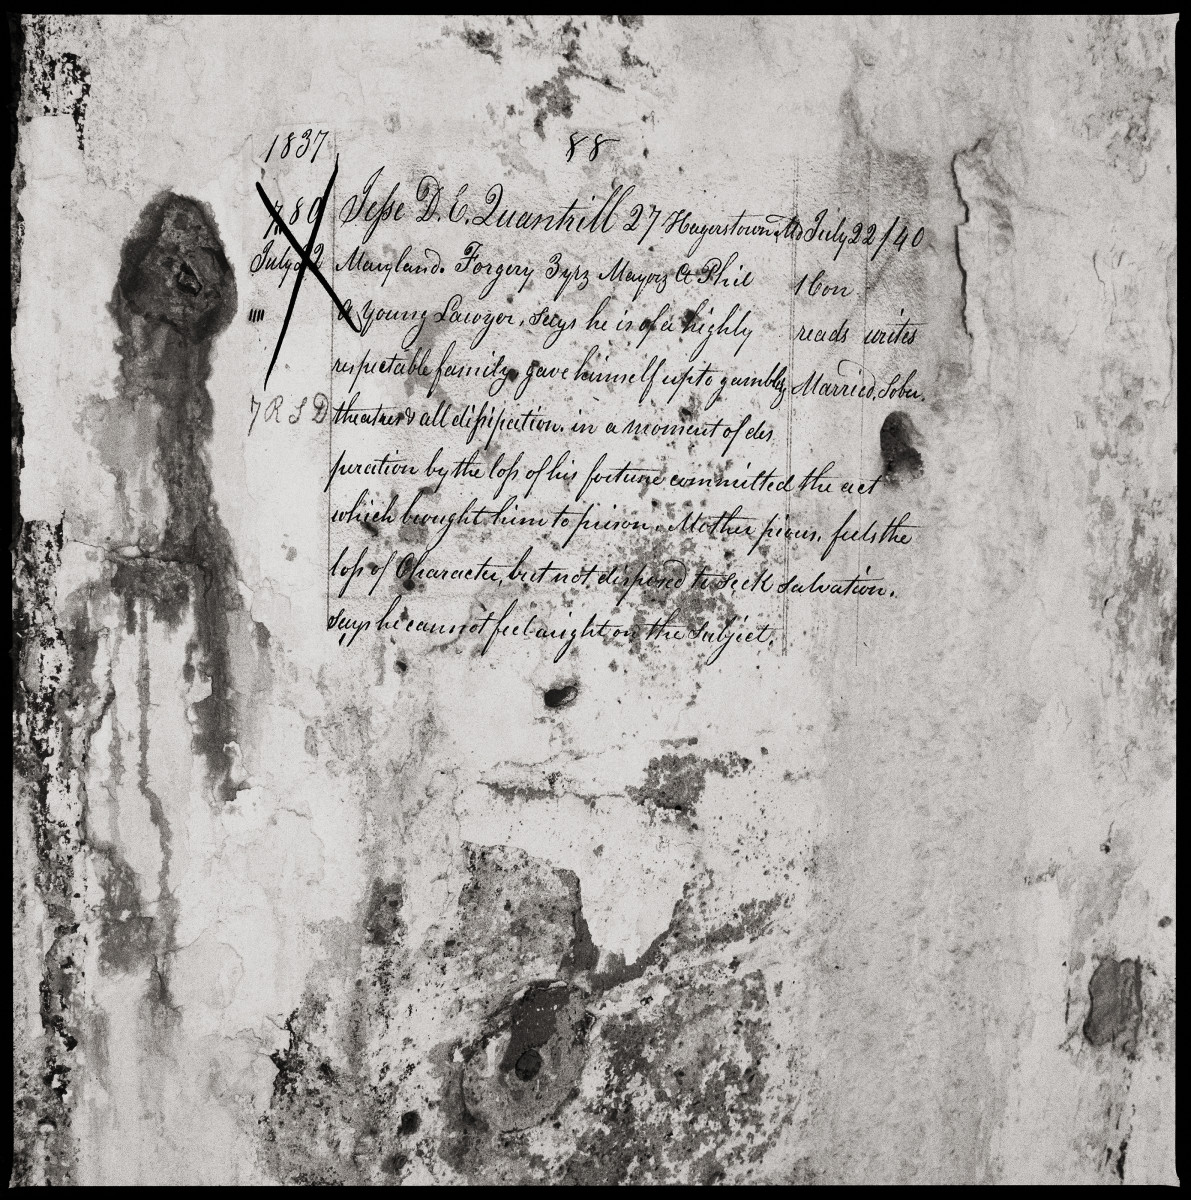 Jepe D. E. Quantrill by Eric T. Kunsman  Image: ID: A black and white image shows a decrepit wall with chipped paint and discoloration.  Overlaying the image is information about former prisoner Jepe D. E. Quantrill.